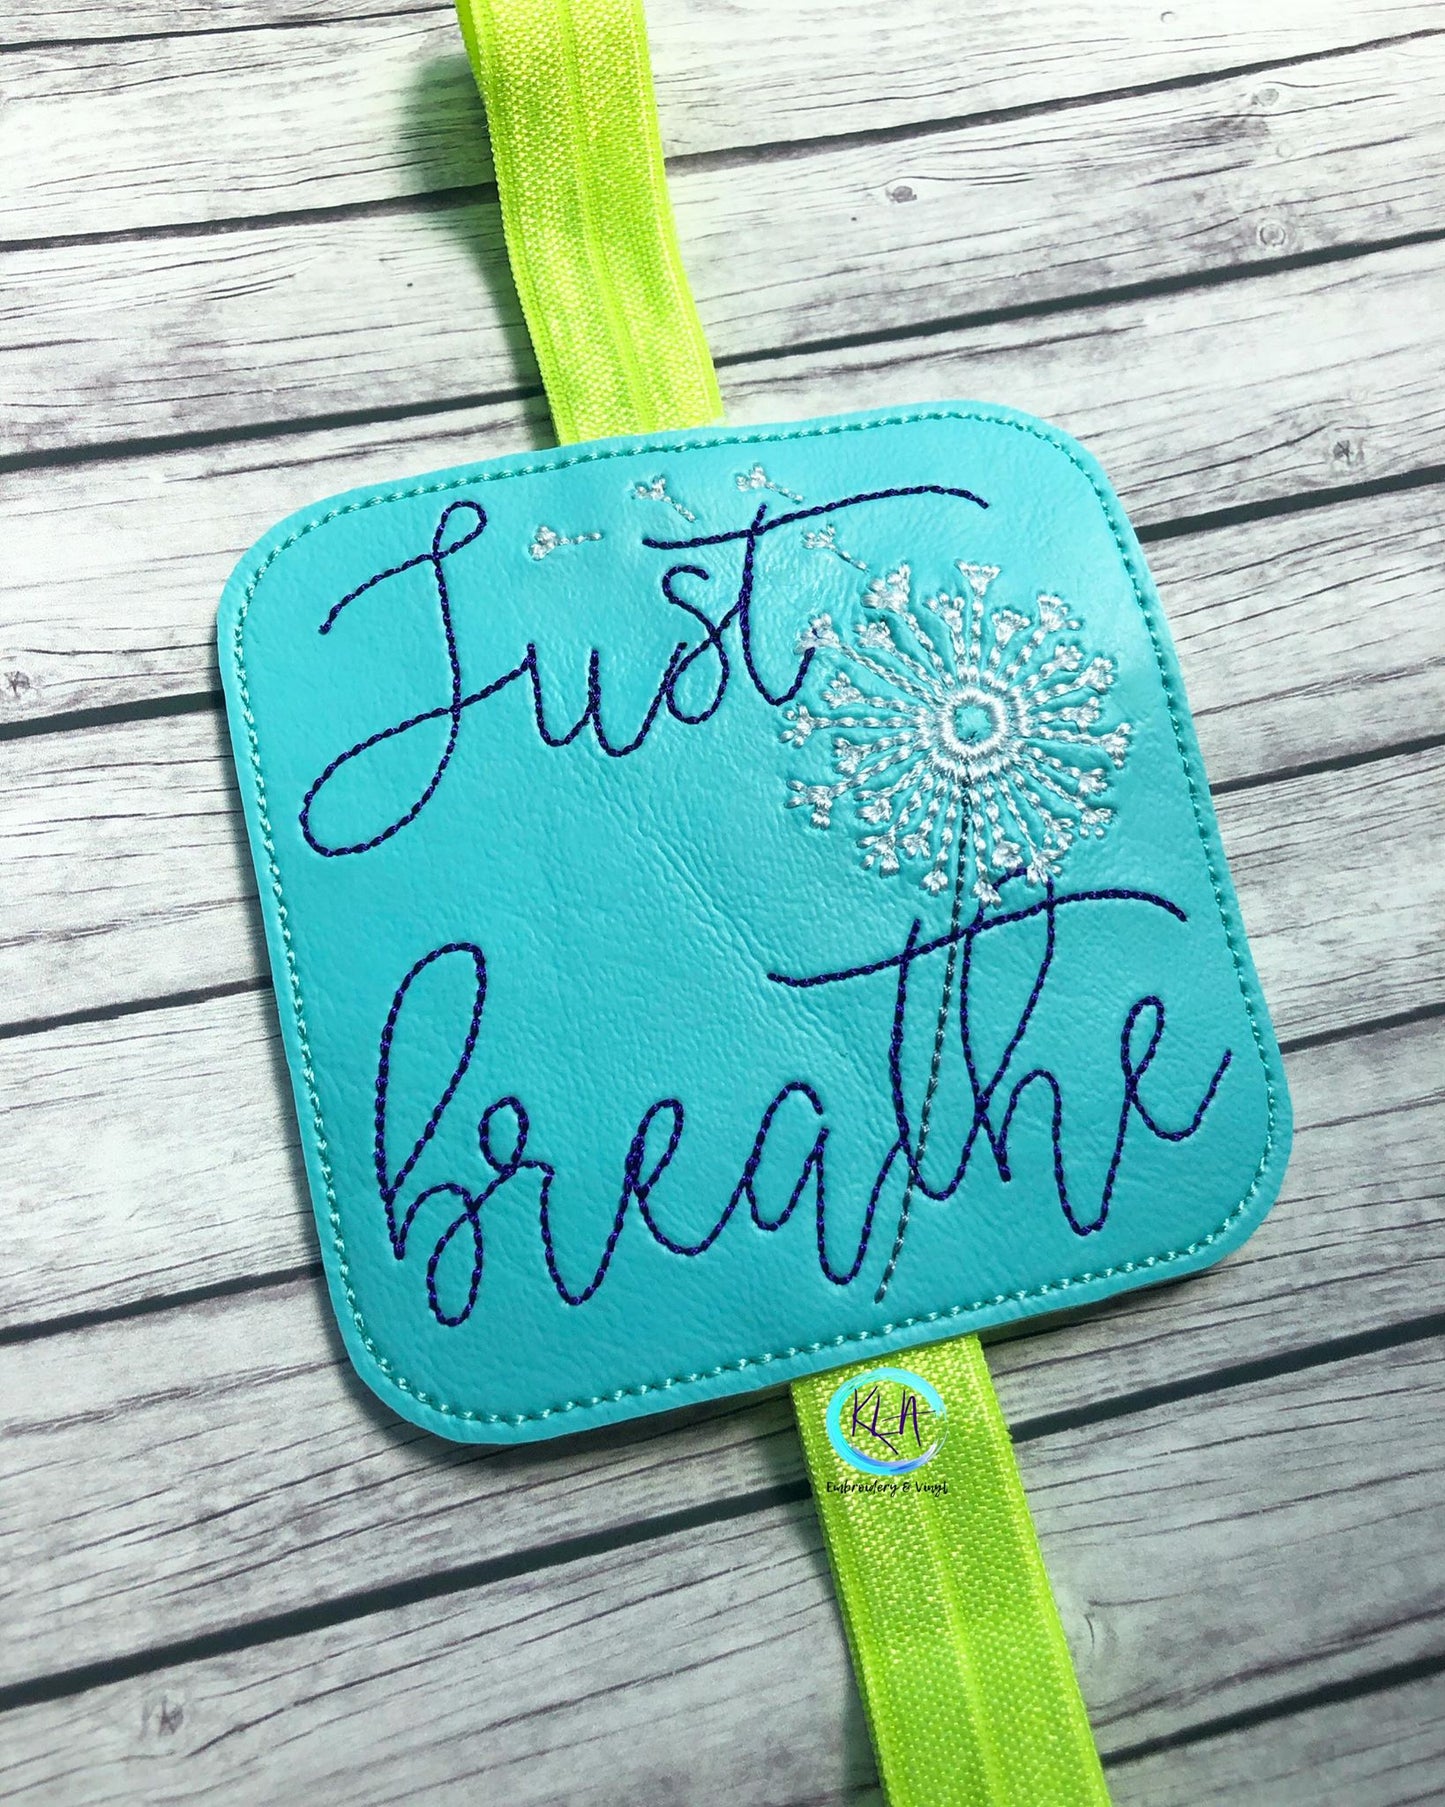 Just Breathe Book Band - Digital Embroidery Design